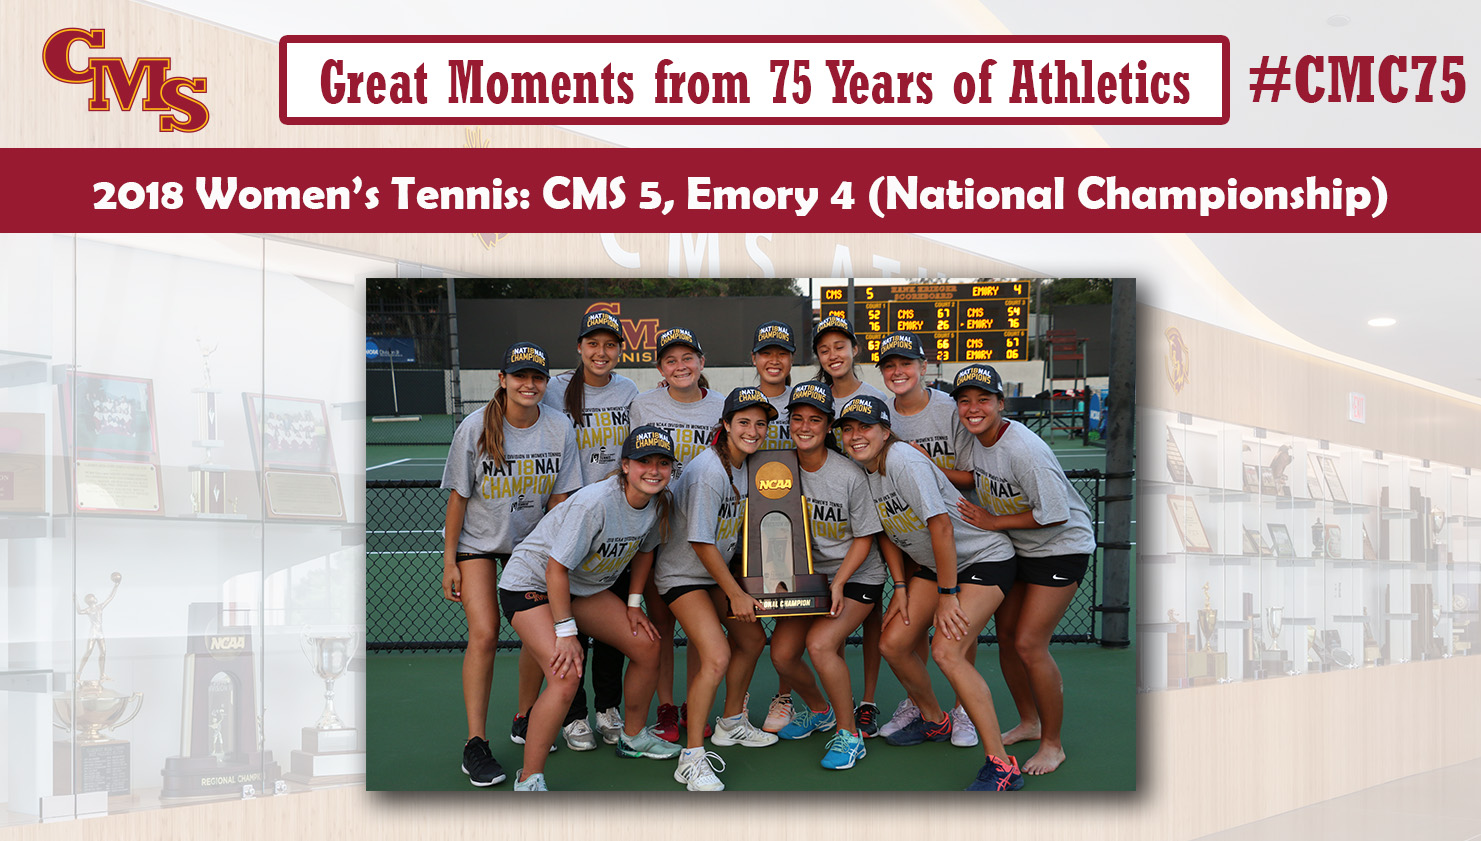 The team celebrating with the national championship trophy. Words over the photo read: Great Moments from 75 Years of Athletics. 2018 Women's Tennis: CMS 5, Emory 4 (National Championship)